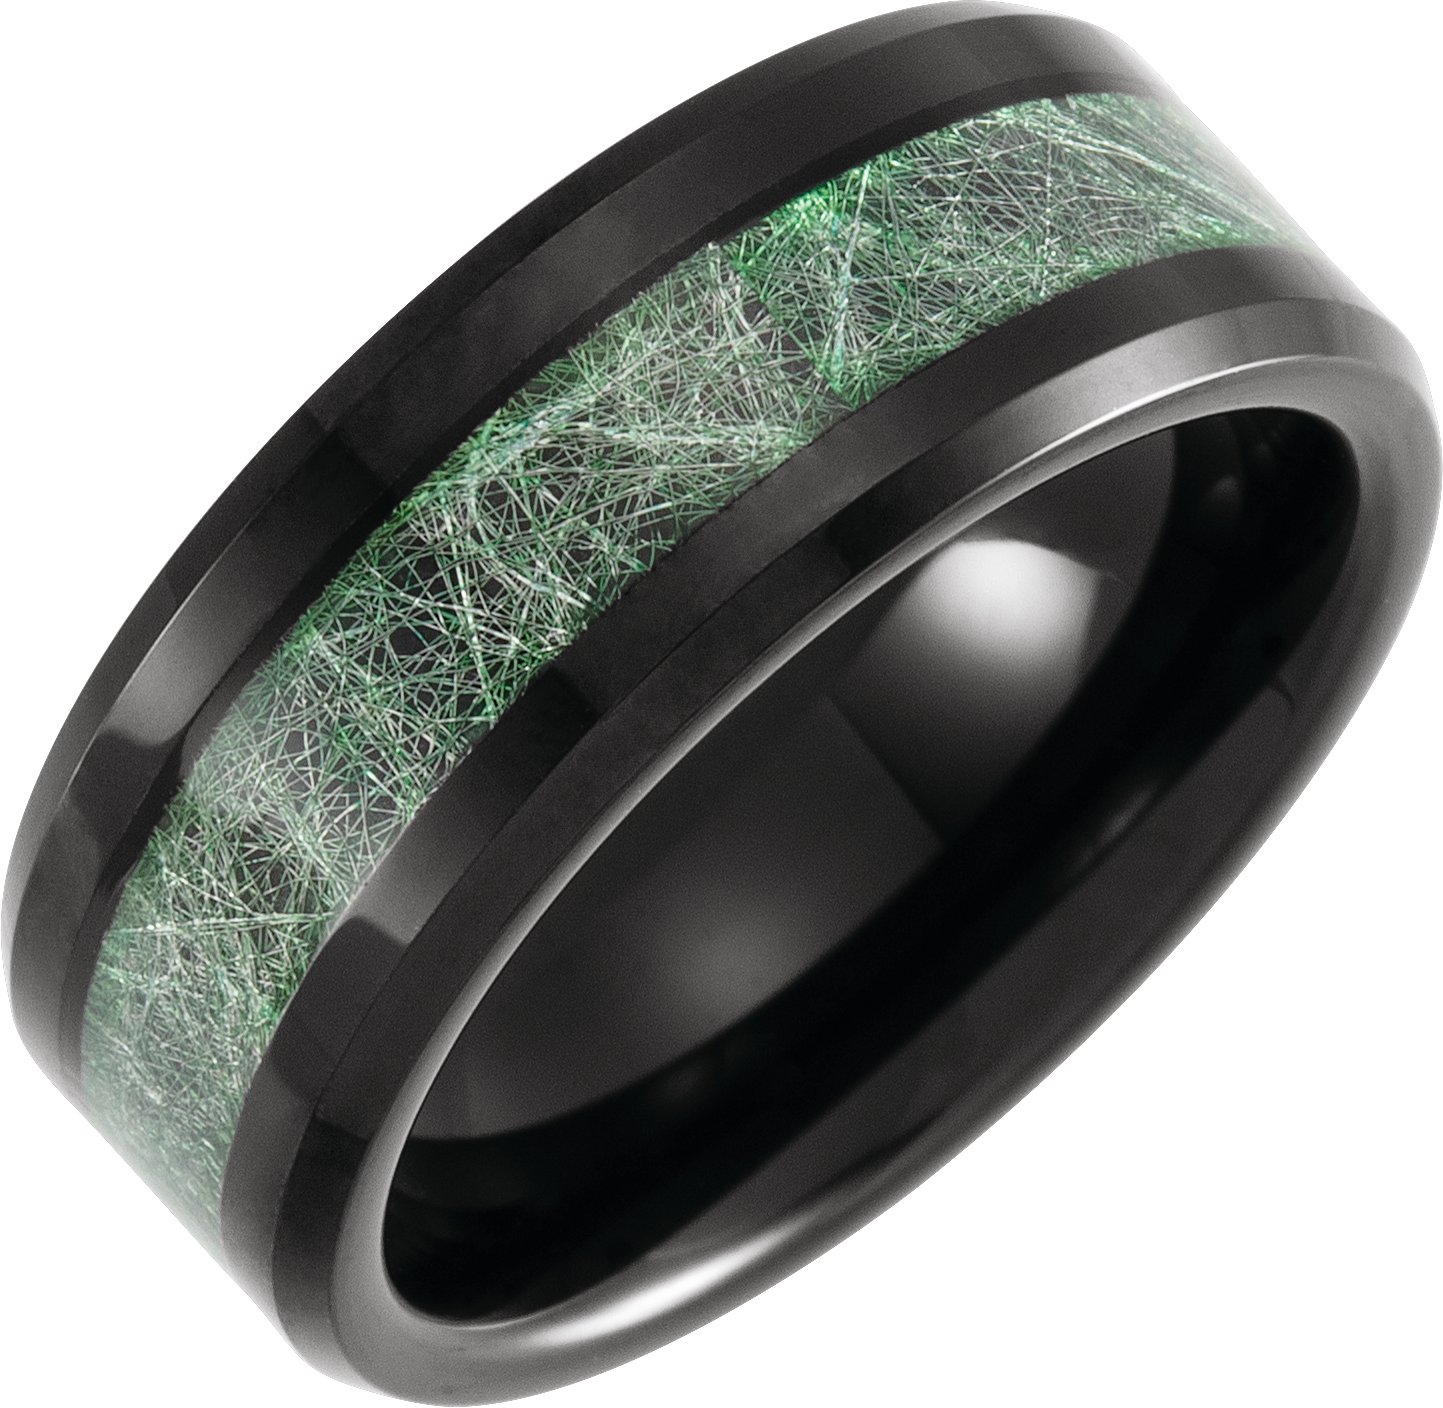 Tungsten 8 mm Beveled Band with Imitation Meteorite Inlay Size 13